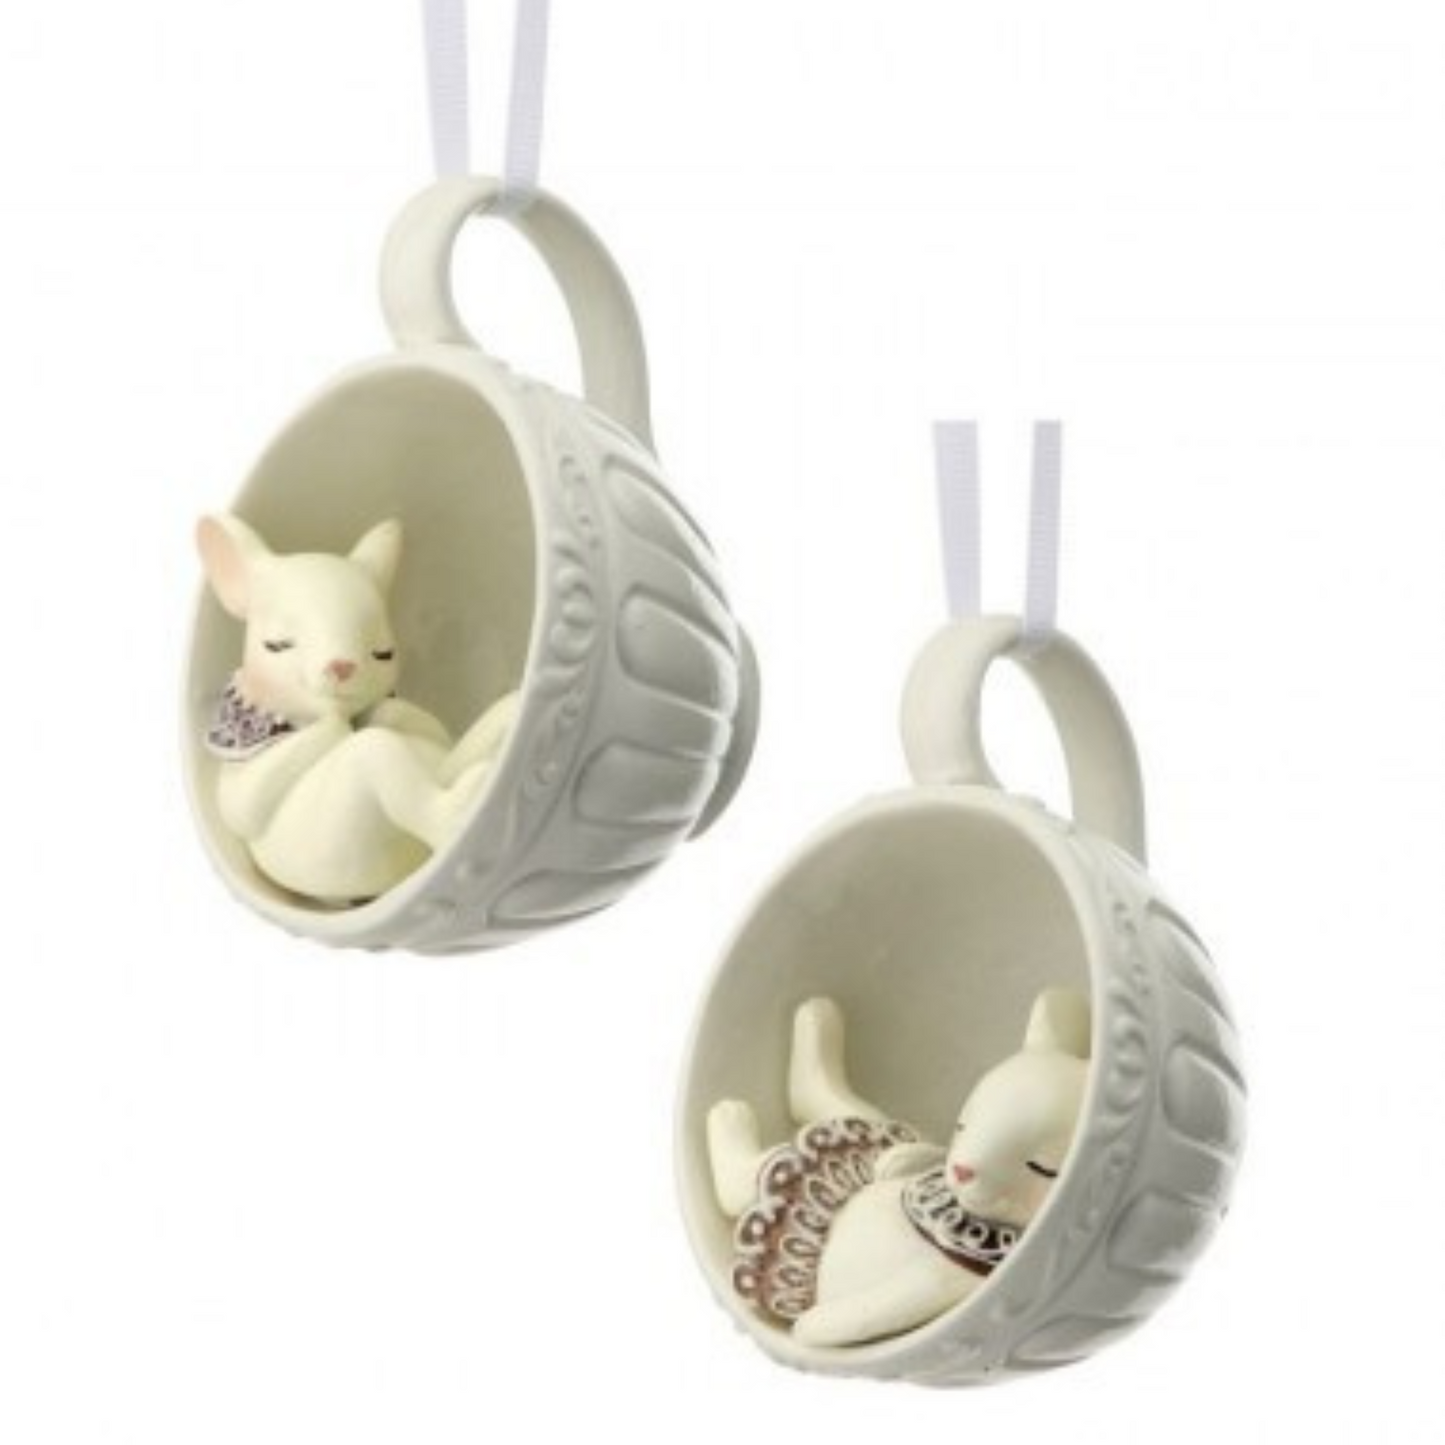 Gingerbread Mice in a Teacup Ornaments